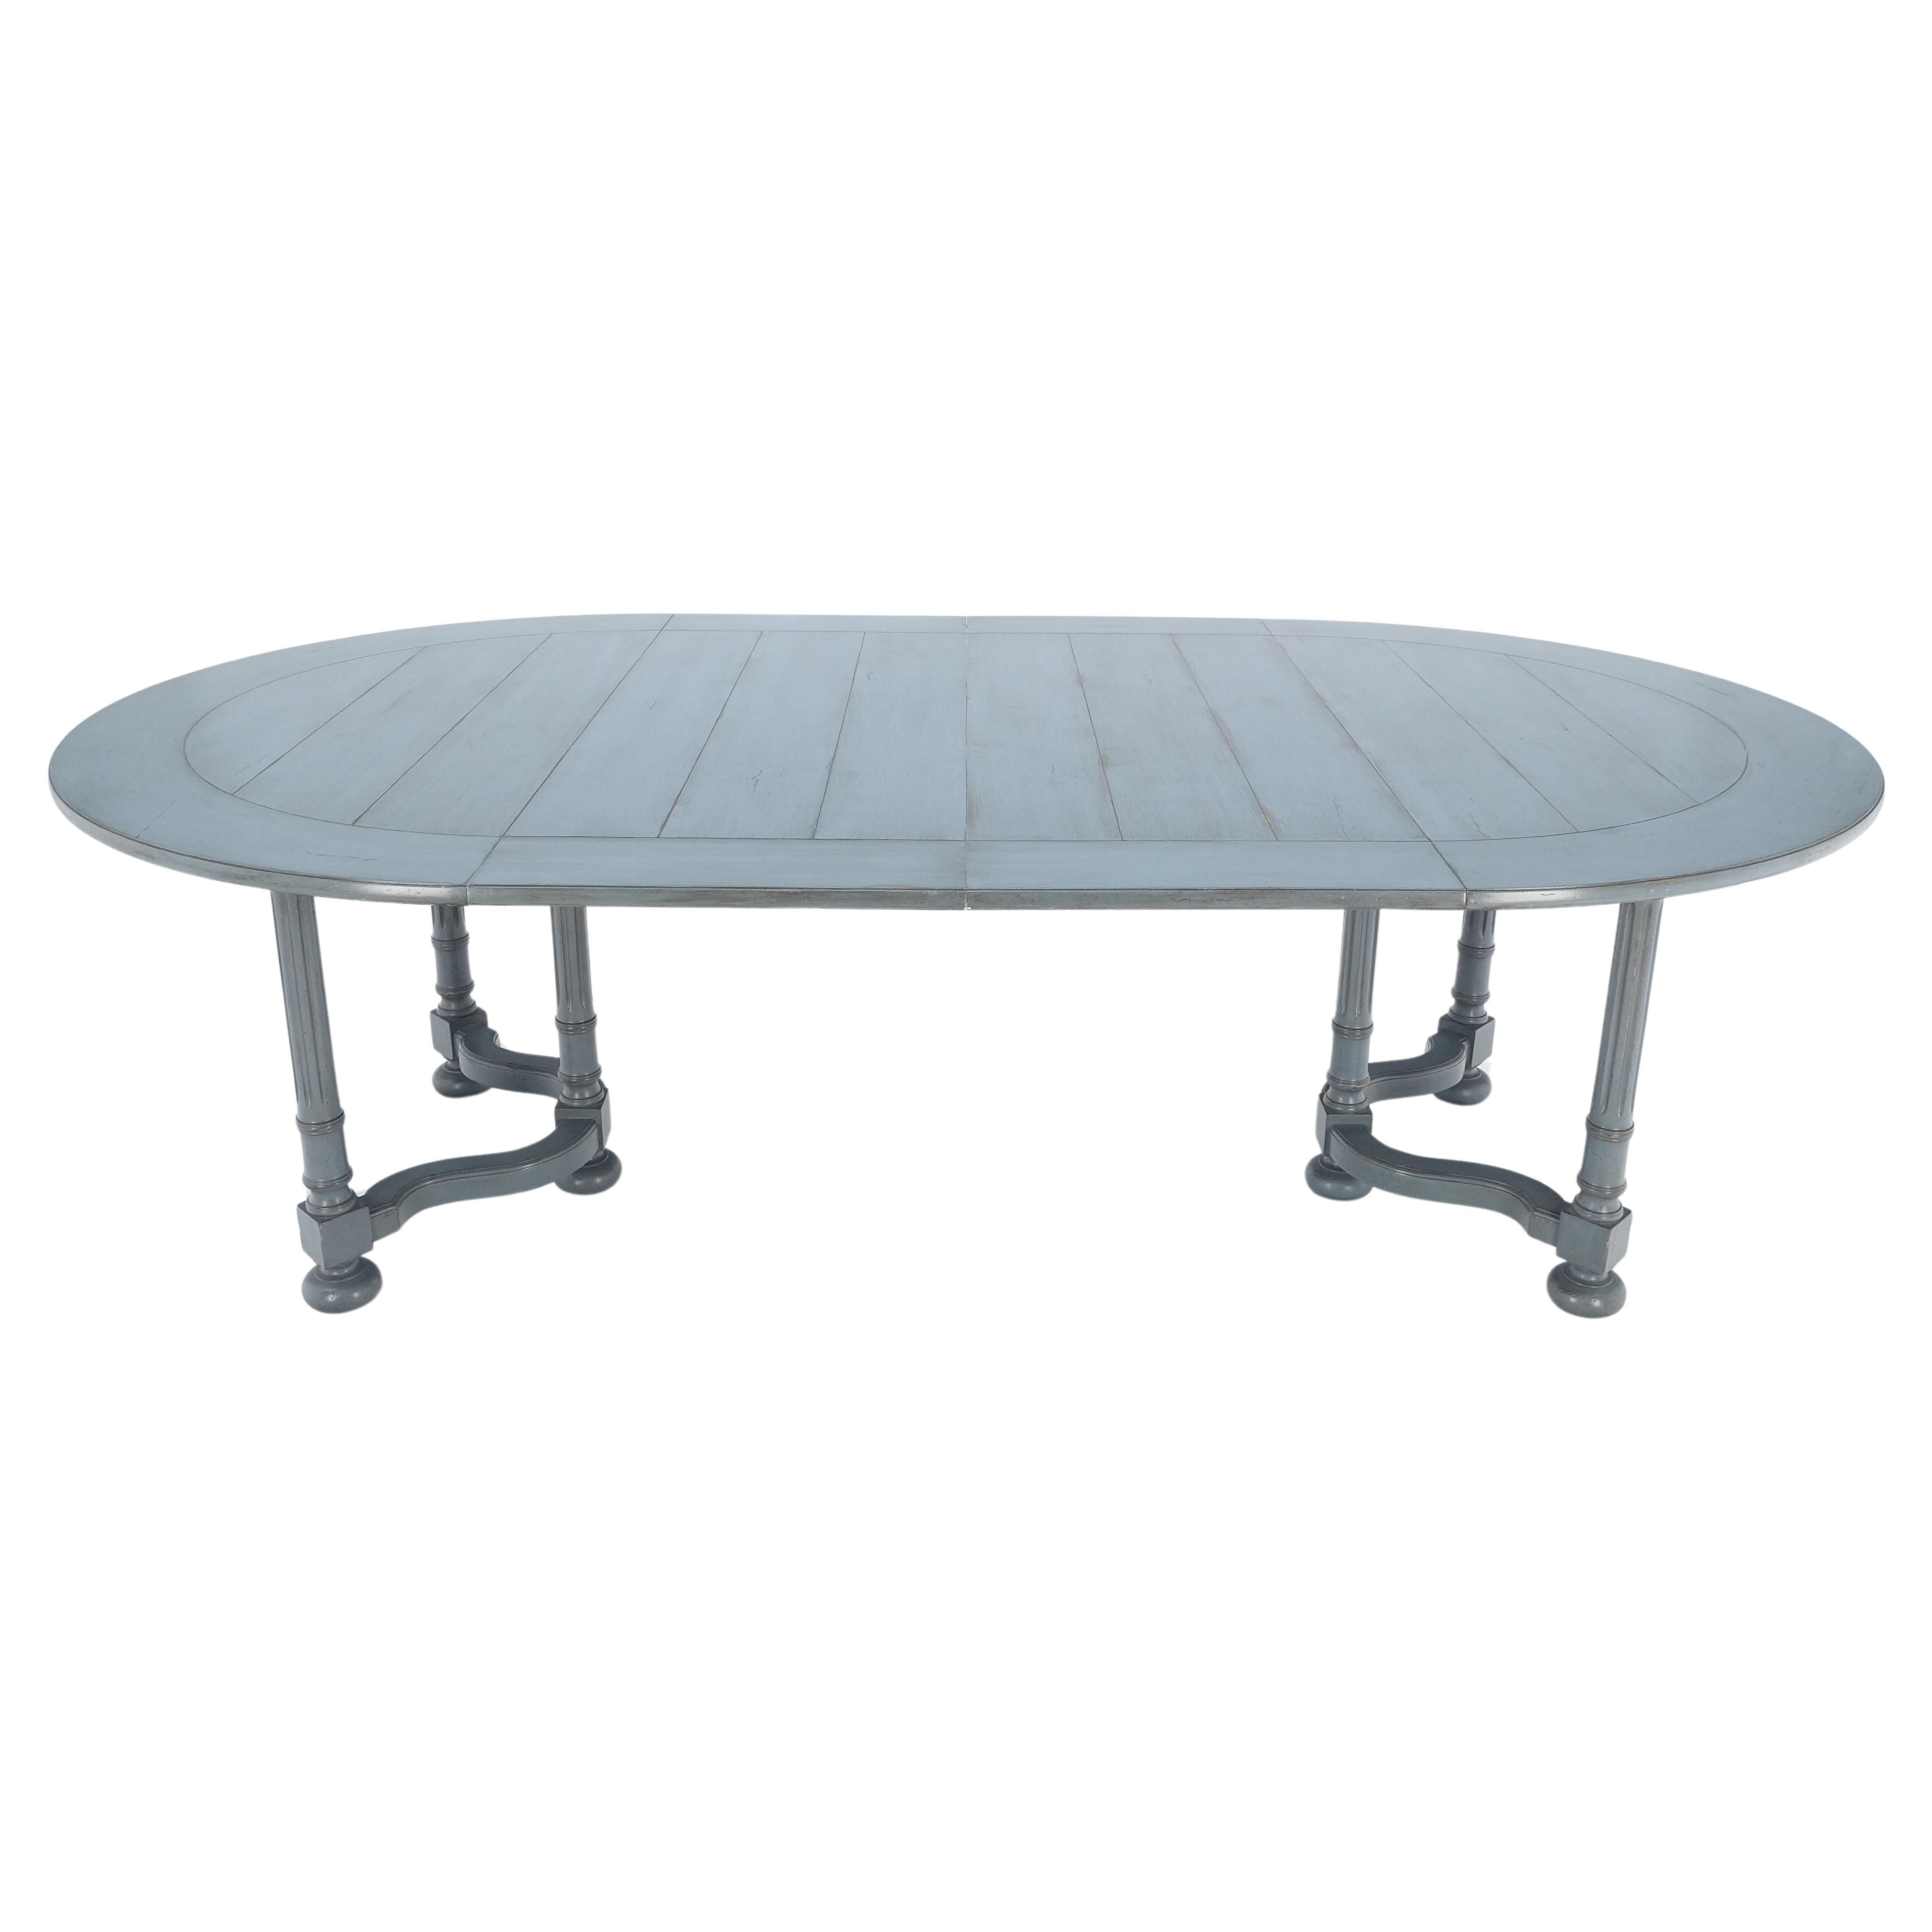 Baker Round Blue Grey Wash Milk Paint Style Finish Dining Table 2 Leaves MINT! For Sale